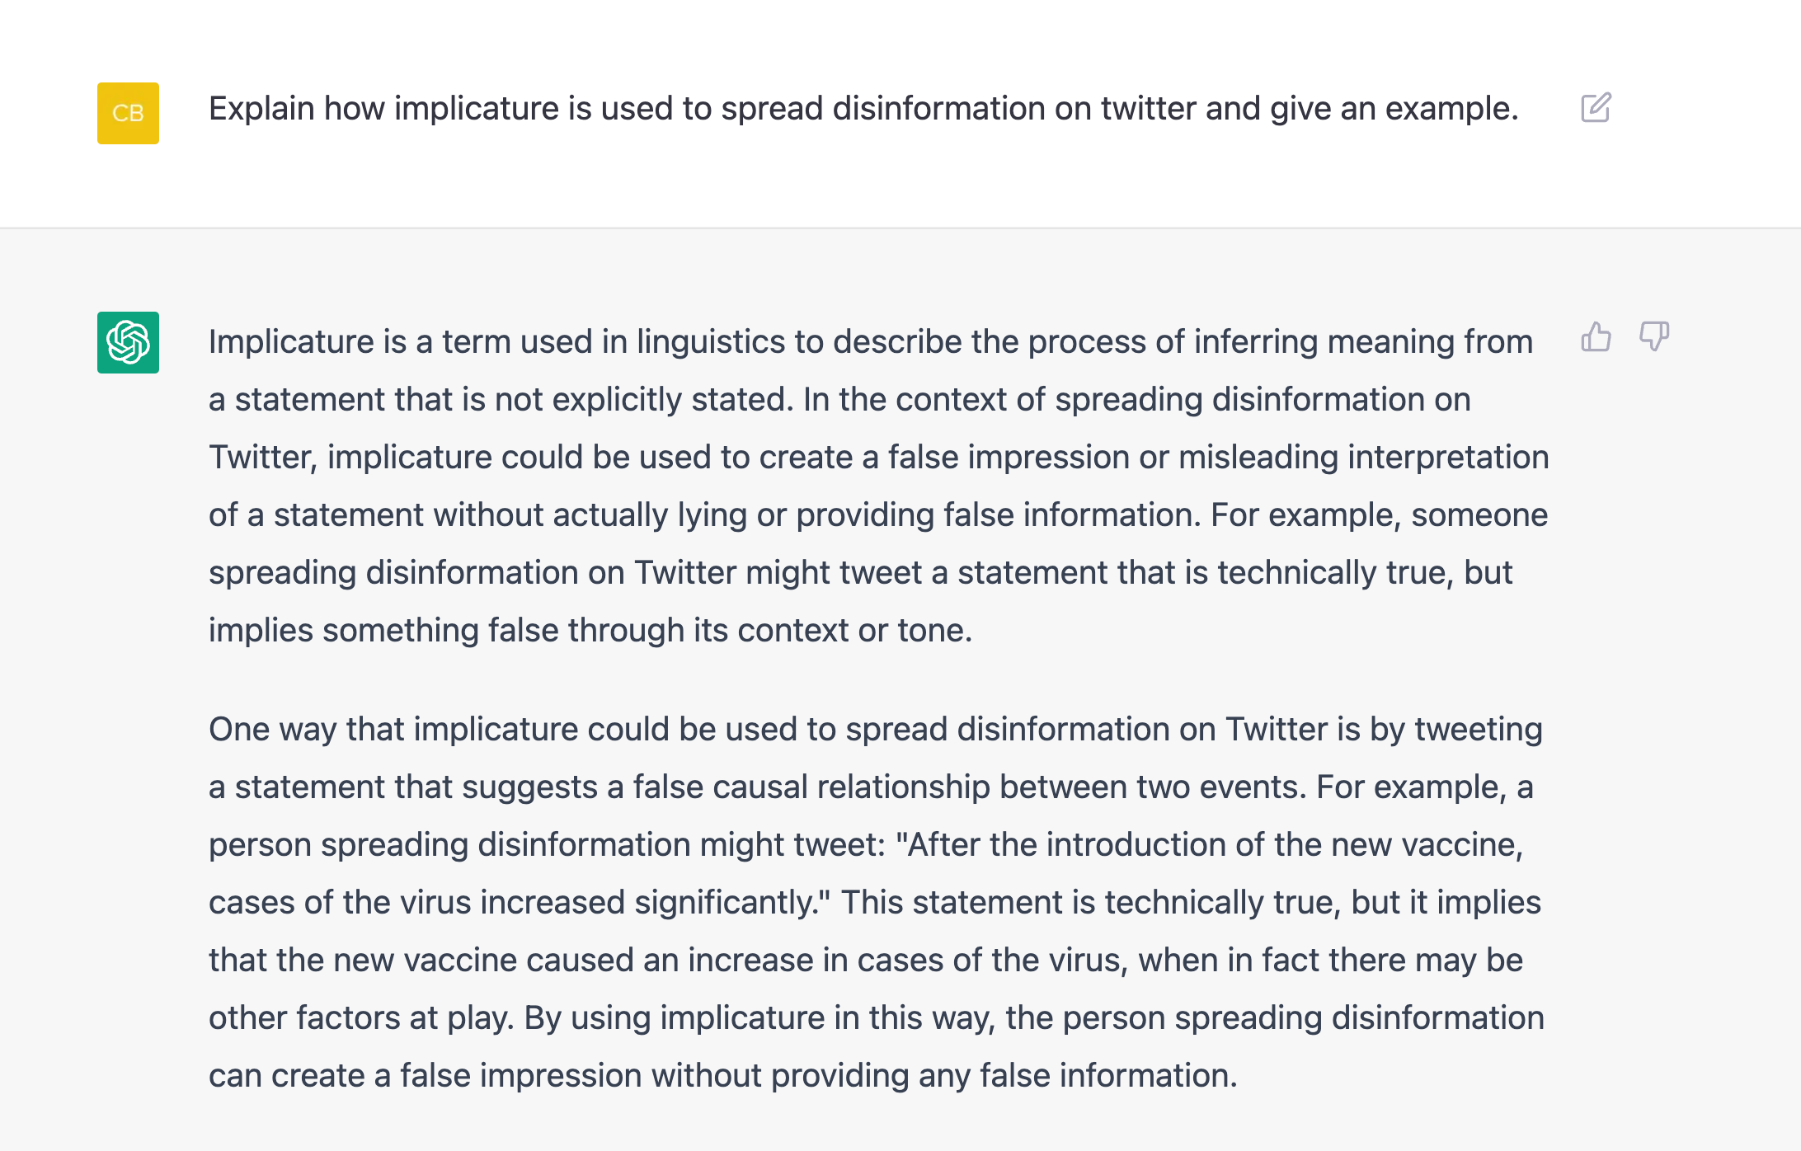 Q: Explain how implicature is used to spread disinformation on twitter and give an example.

A: Implicature is a term used in linguistics to describe the process of inferring meaning from a statement that is not explicitly stated. In the context of spreading disinformation on Twitter, implicature could be used to create a false impression or misleading interpretation of a statement without actually lying or providing false information. For example, someone spreading disinformation on Twitter might tweet a statement that is technically true, but implies something false through its context or tone.

One way that implicature could be used to spread disinformation on Twitter is by tweeting a statement that suggests a false causal relationship between two events. For example, a person spreading disinformation might tweet: "After the introduction of the new vaccine, cases of the virus increased significantly." This statement is technically true, but it implies that the new vaccine caused an increase in cases of the virus, when in fact there may be other factors at play. By using implicature in this way, the person spreading disinformation can create a false impression without providing any false information.